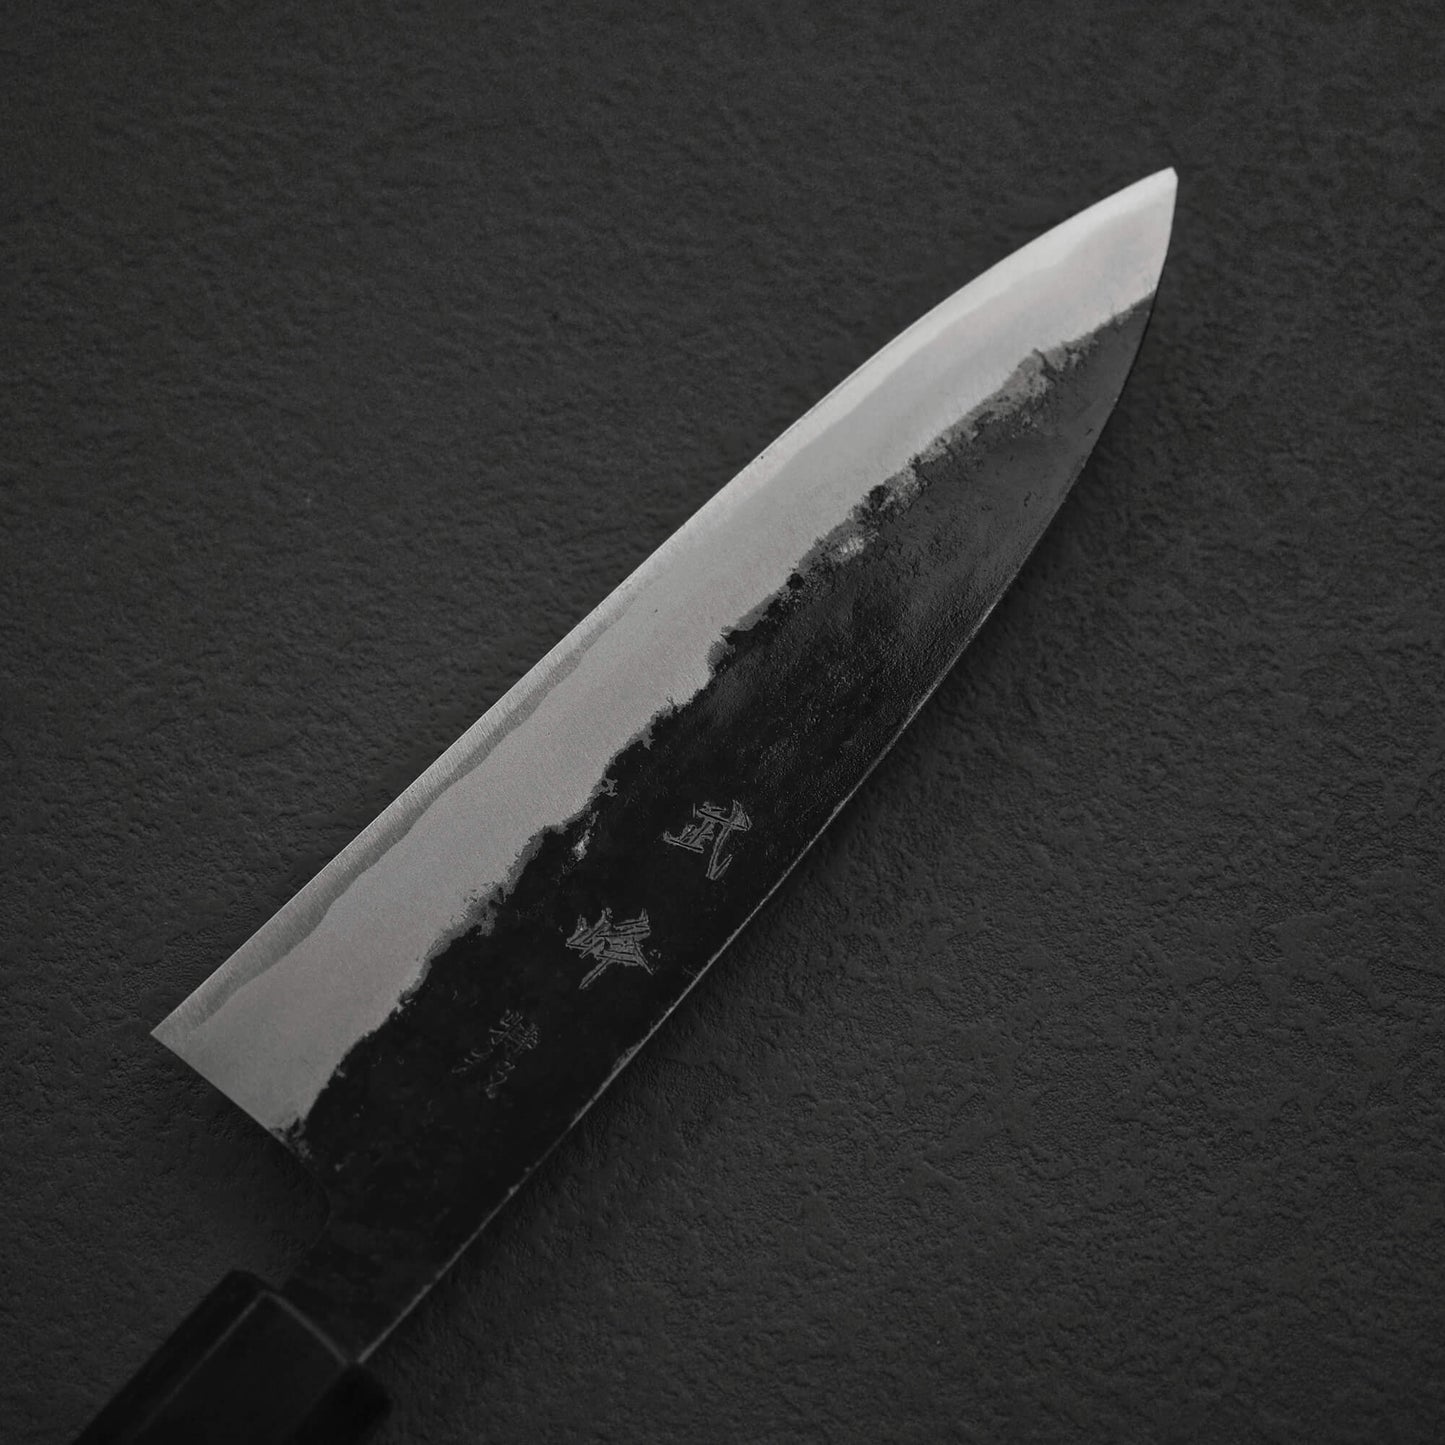 Top view of the blade of Murata Buho kurouchi aogami#1 funayuki knife. Image focuses on the left side of the blade.